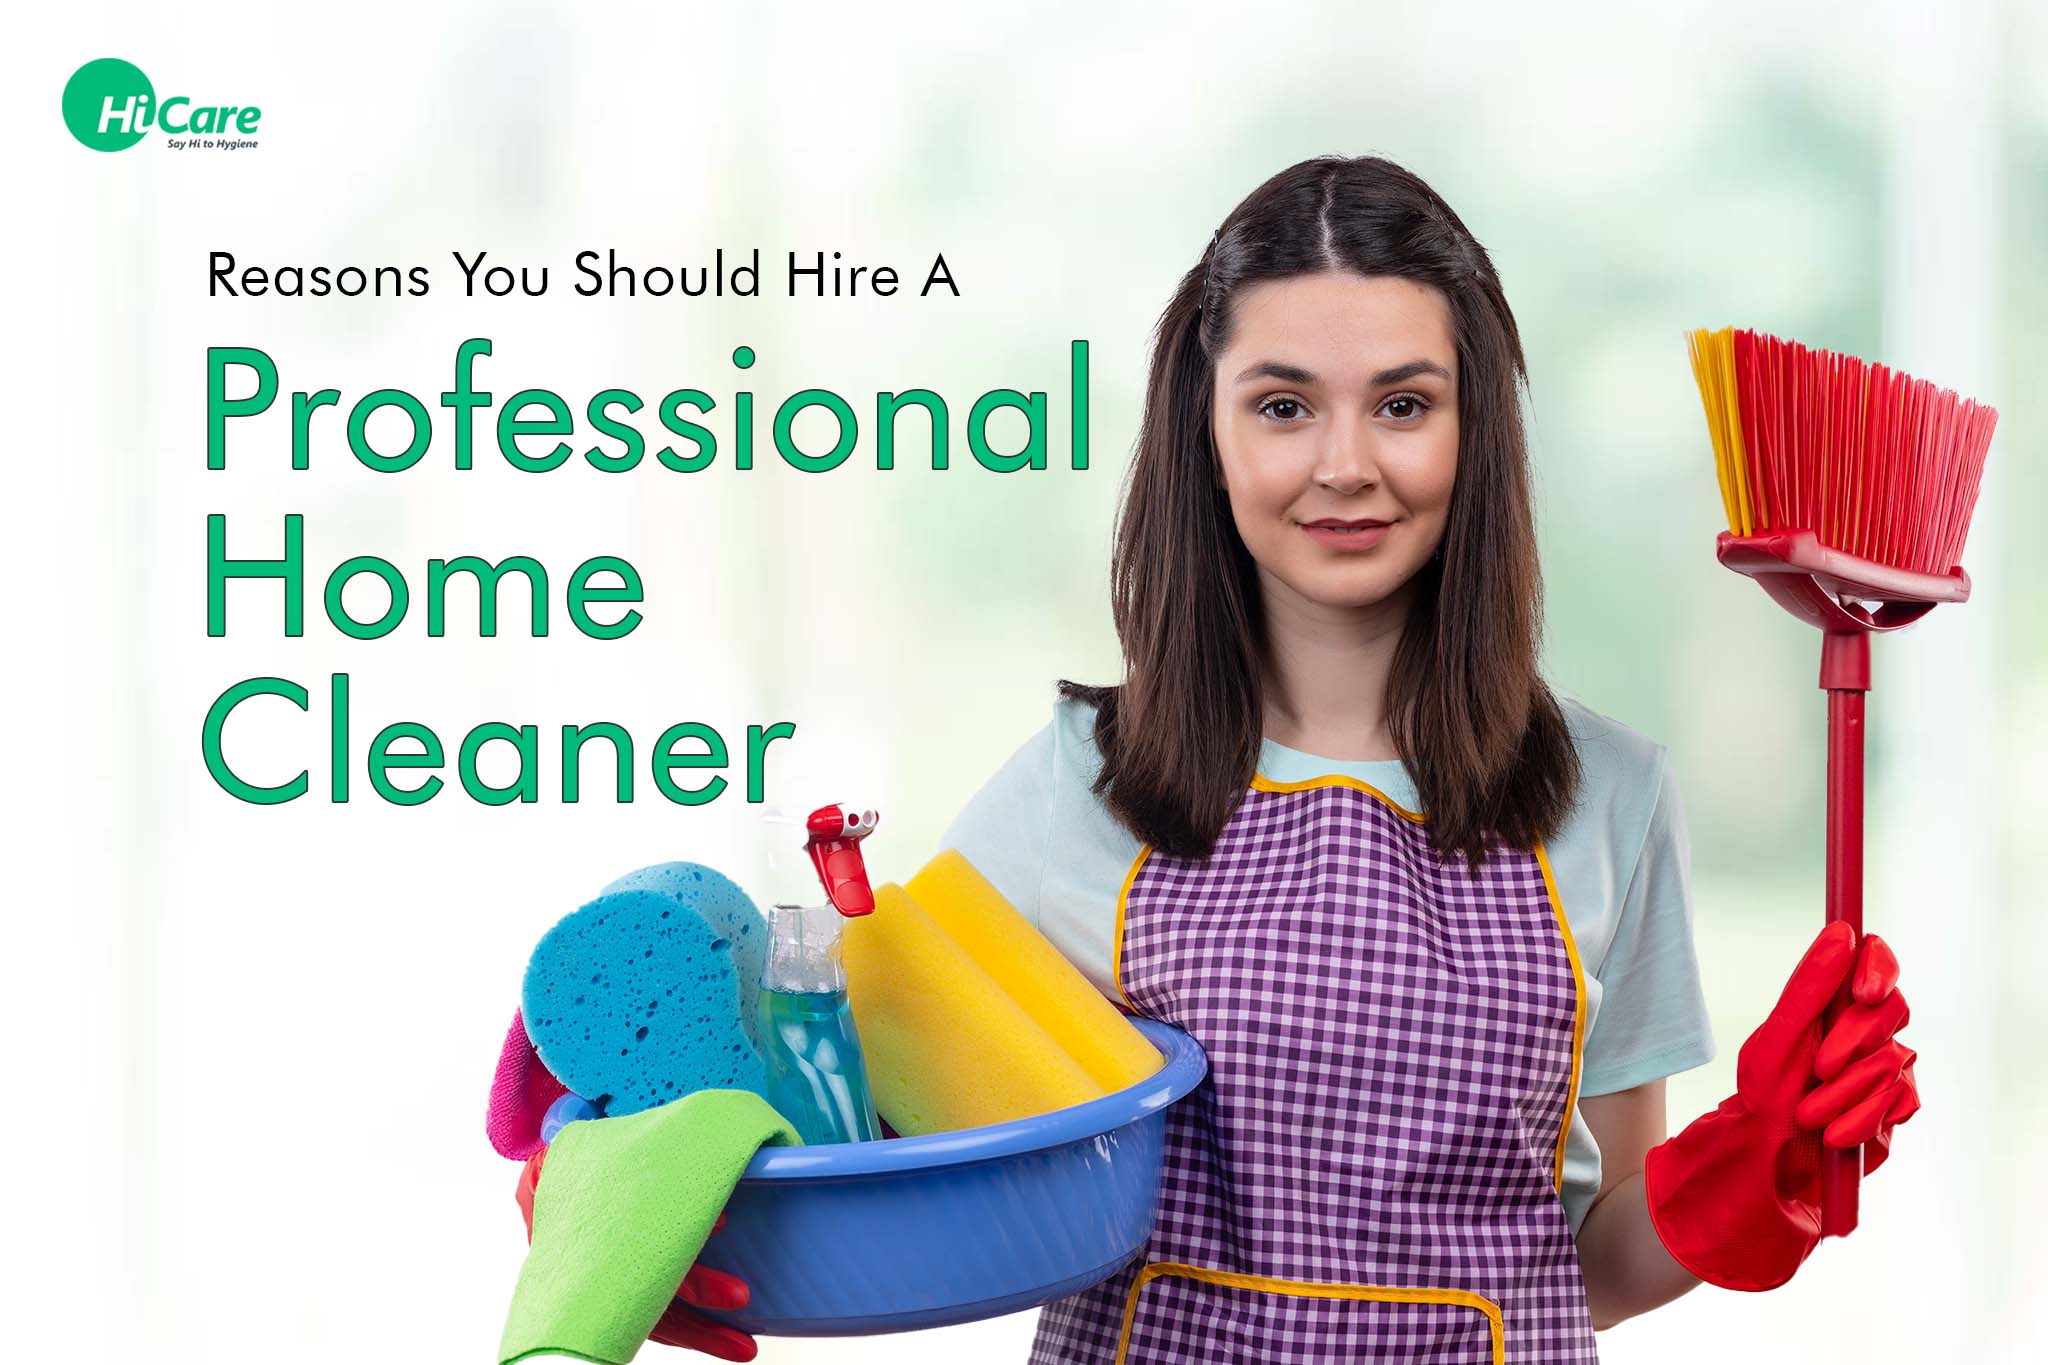 10 Reasons You Should Hire A Professional Home Cleaner | HiCare